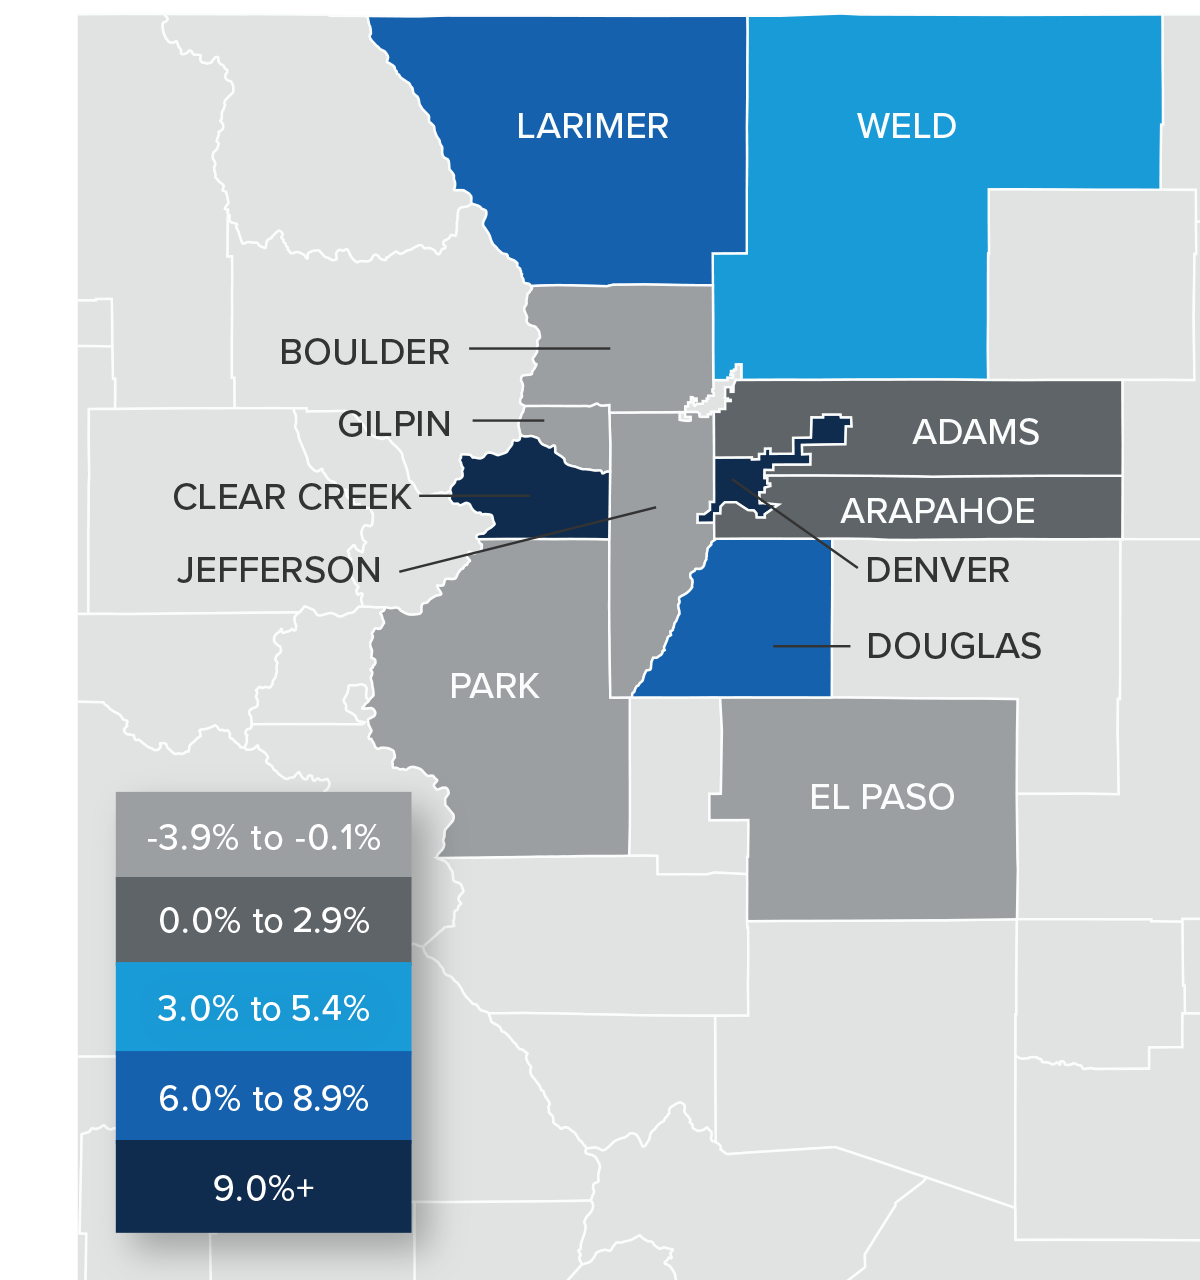 A map showing the real estate home prices percentage changes for various counties in Colorado. Different colors correspond to different tiers of percentage change. Boulder, Gilpin, Jefferson, Park, and El Paso have a percentage change in the -3.9% to -0.1%+ range, Adams and Arapahoe counties are in the 0% to 2.9% change range, Weld is in the 3% to 5.4% change range, Douglas is in the 6% to 8.9% change range, and Clear Creek and Denver counties are in the 9%+ change range.